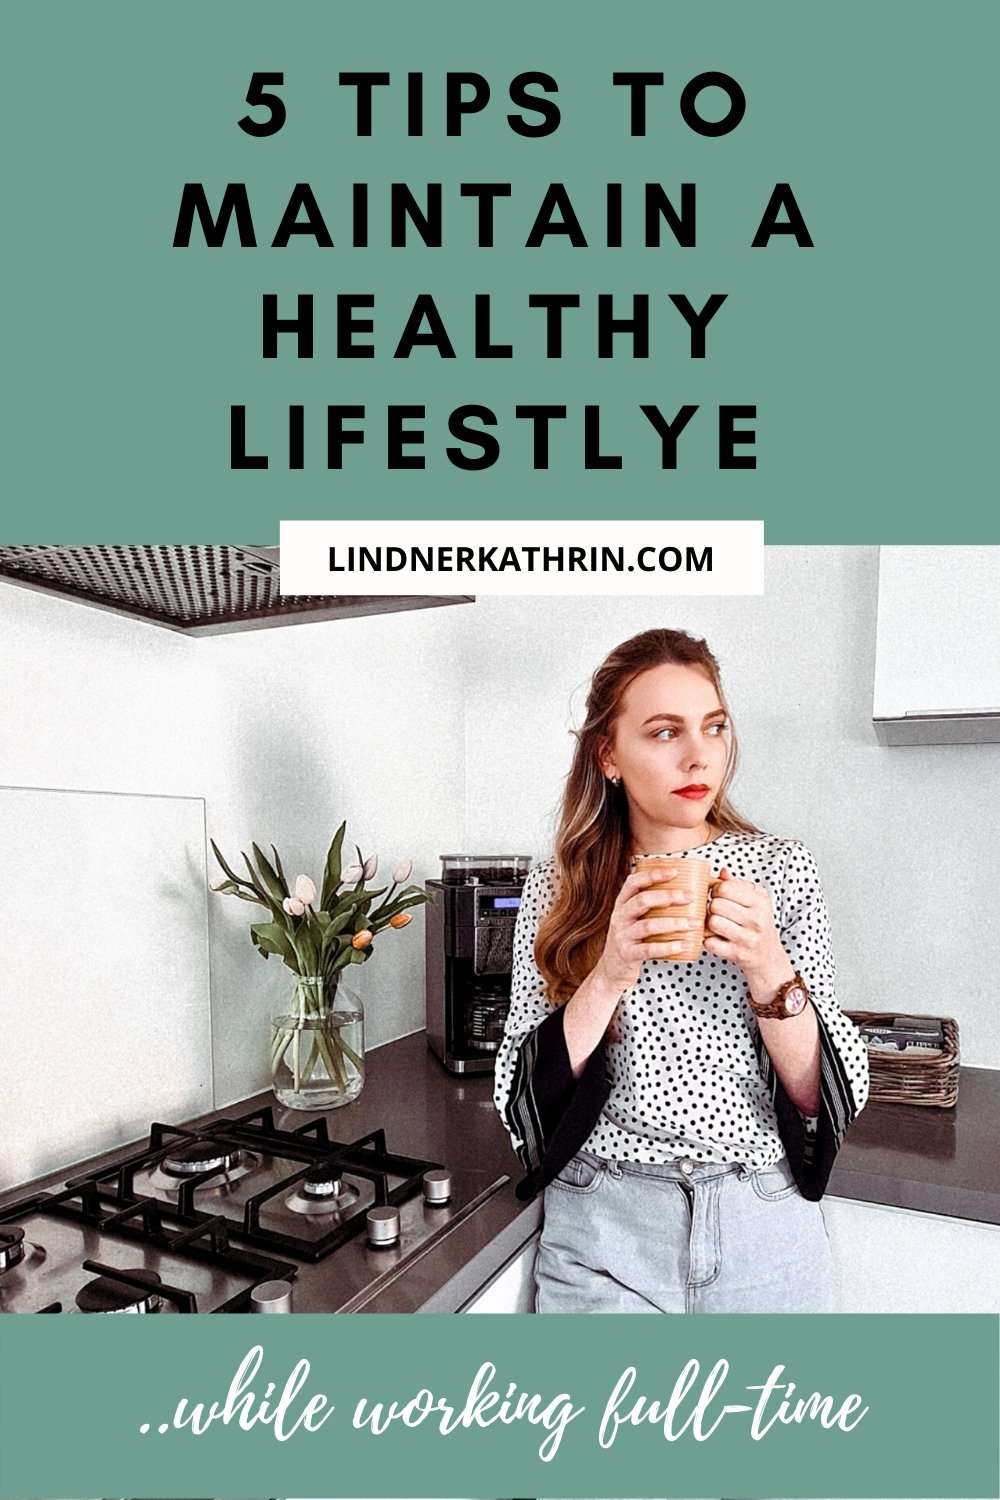 5 Tips to Maintain a Healthy Lifestyle (despite working full time)